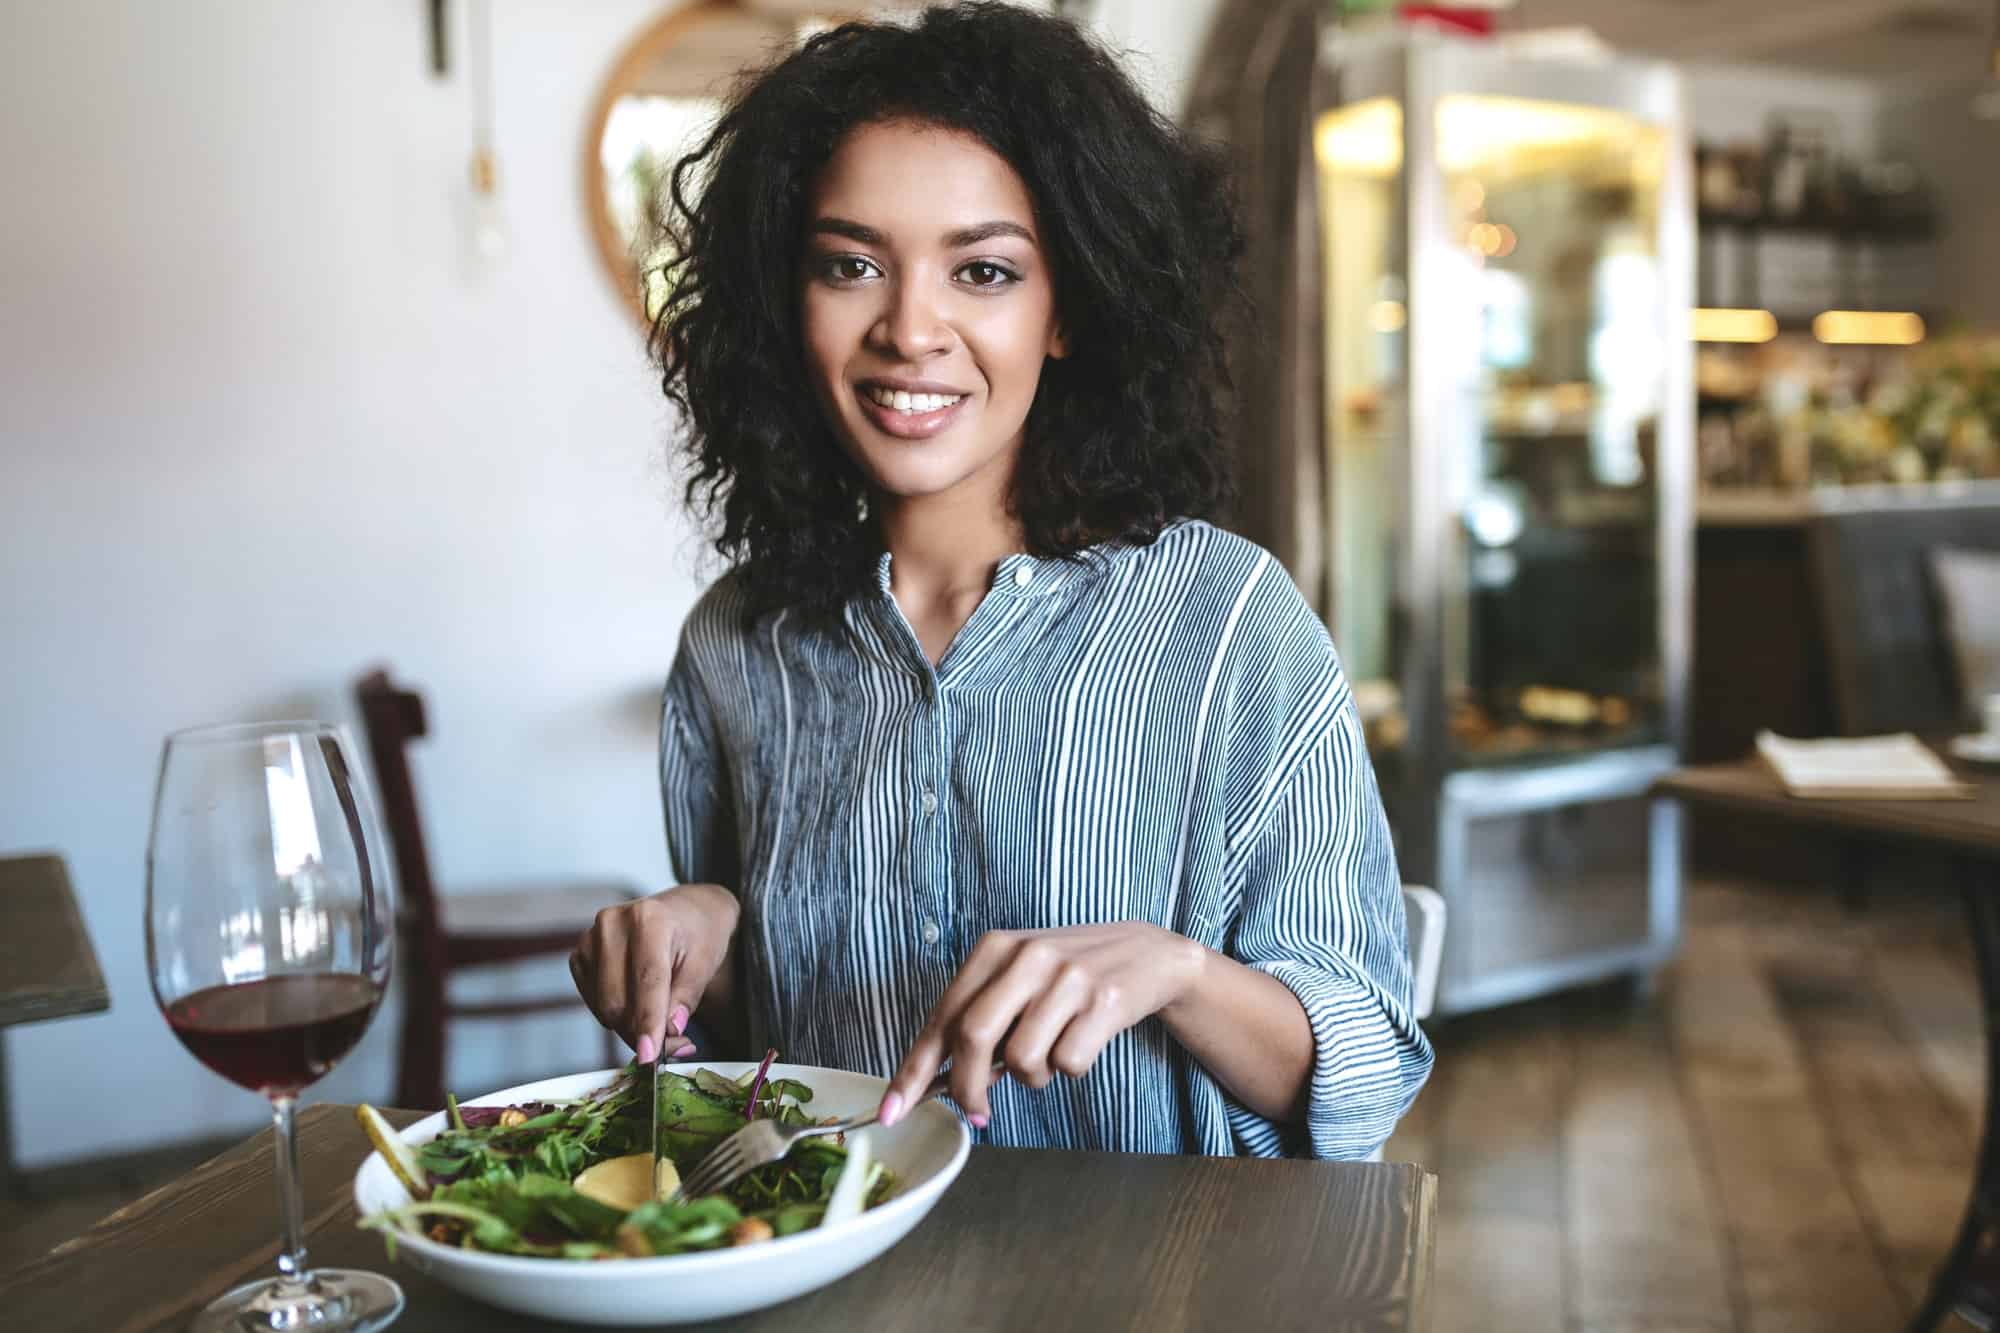 Smiling girl looking in camera with glass of red wine and salad on table at cafe